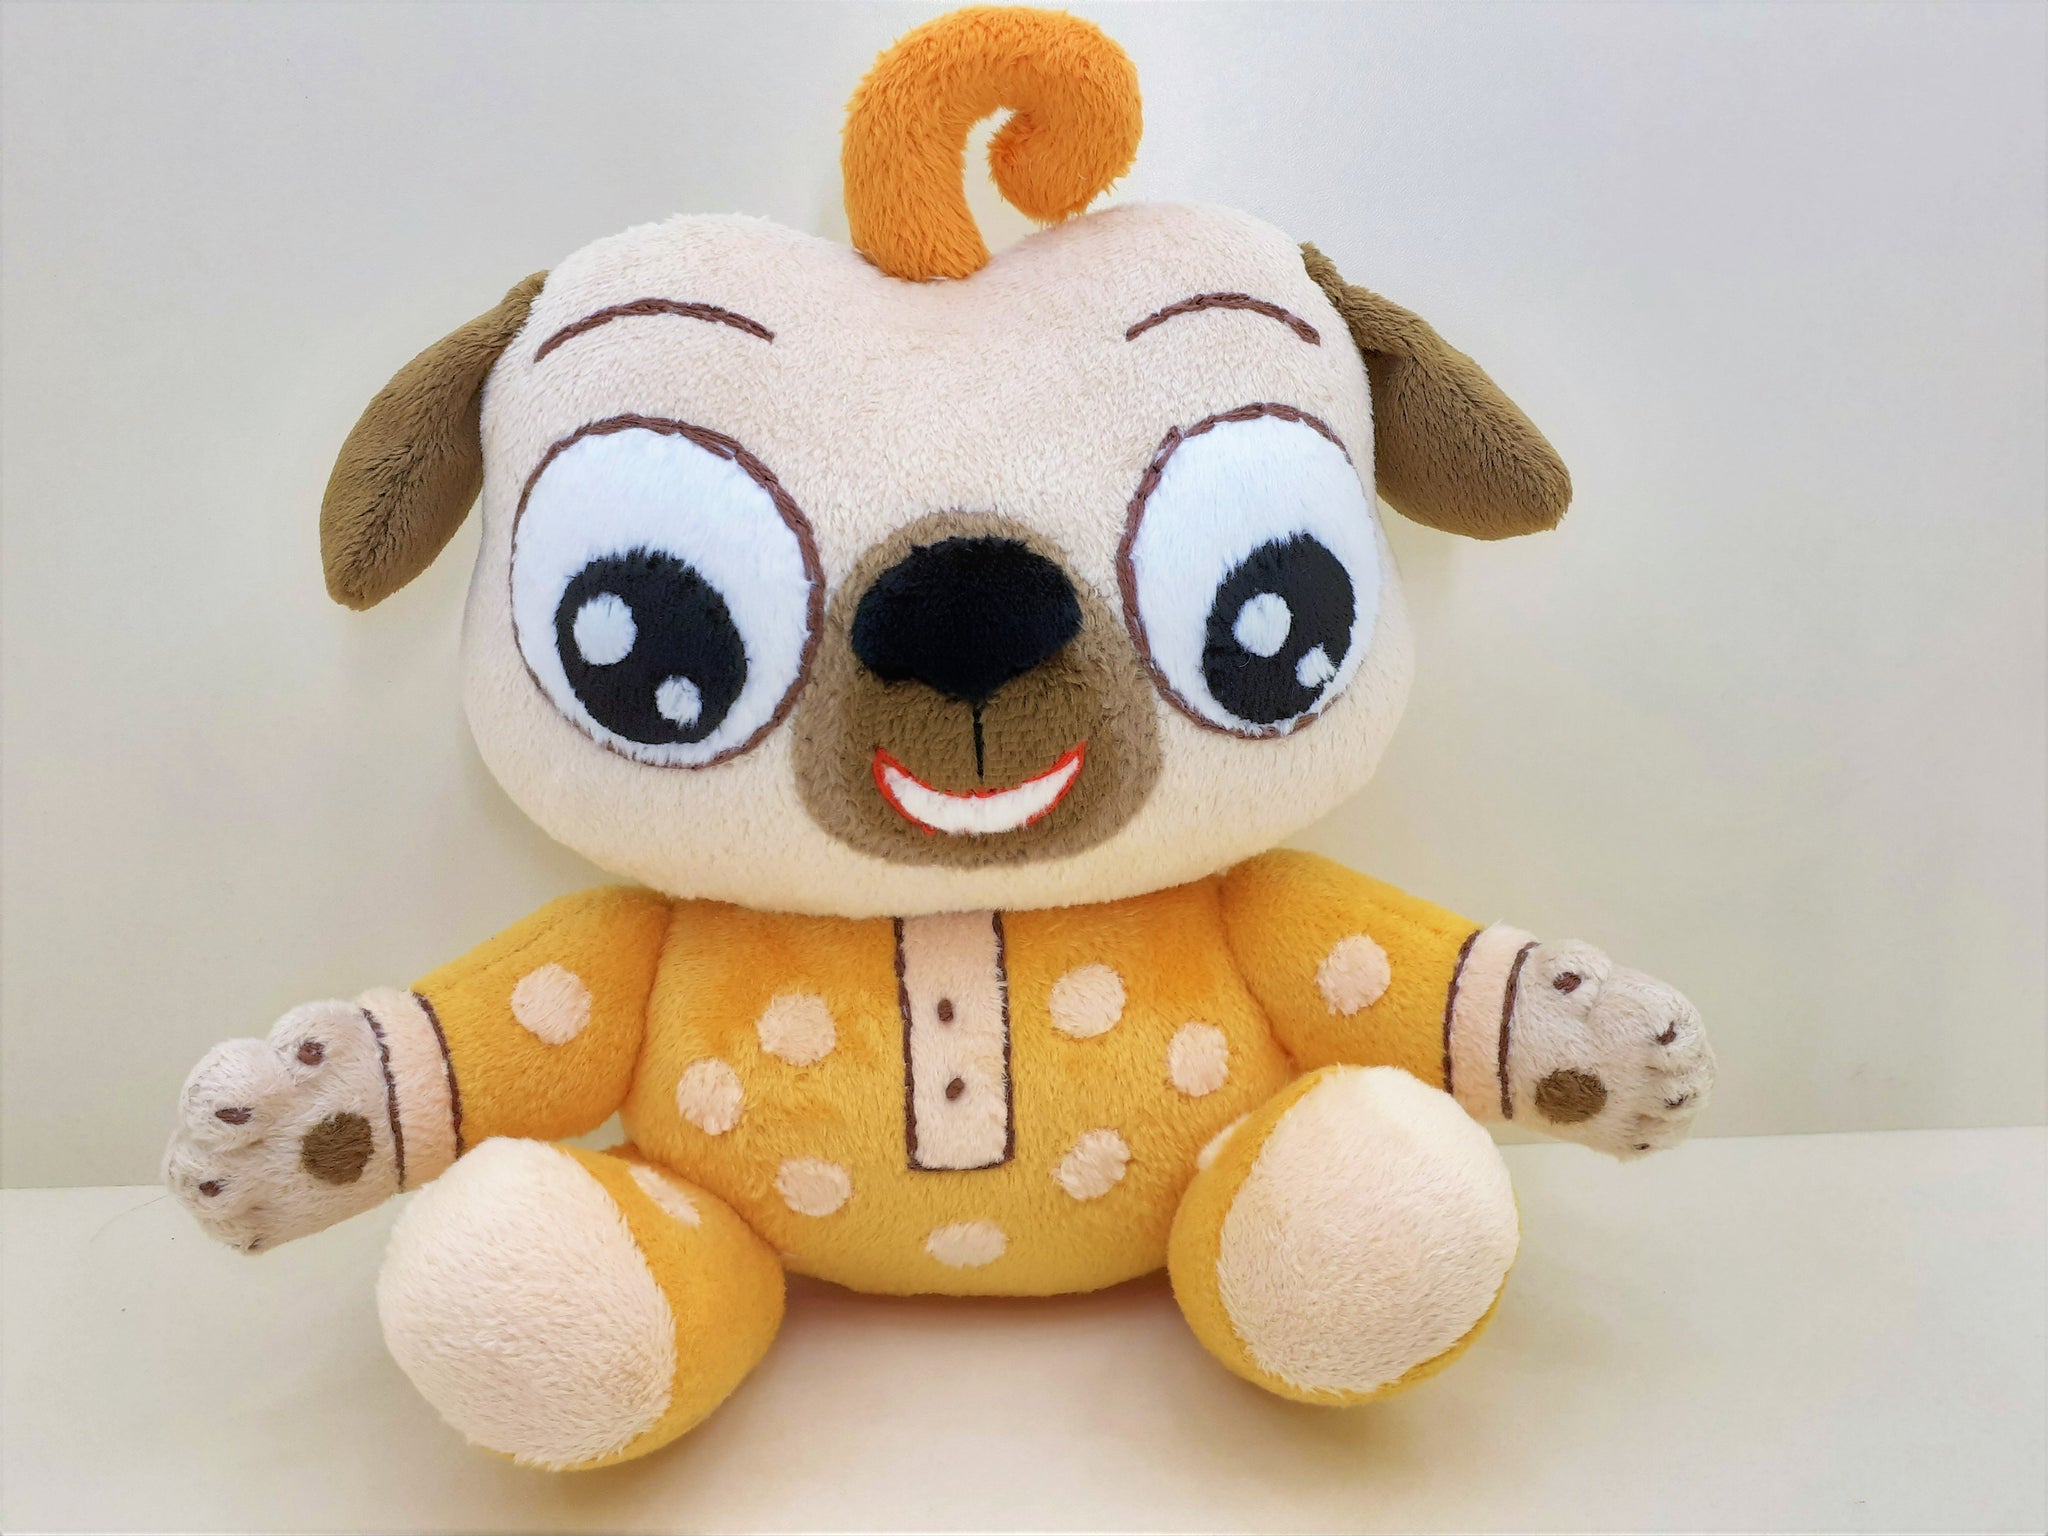 Snuggly Potato 3 Inch Glowing in a Dark Chip and Potato Plush Toy Cartoon  Character -  Sweden